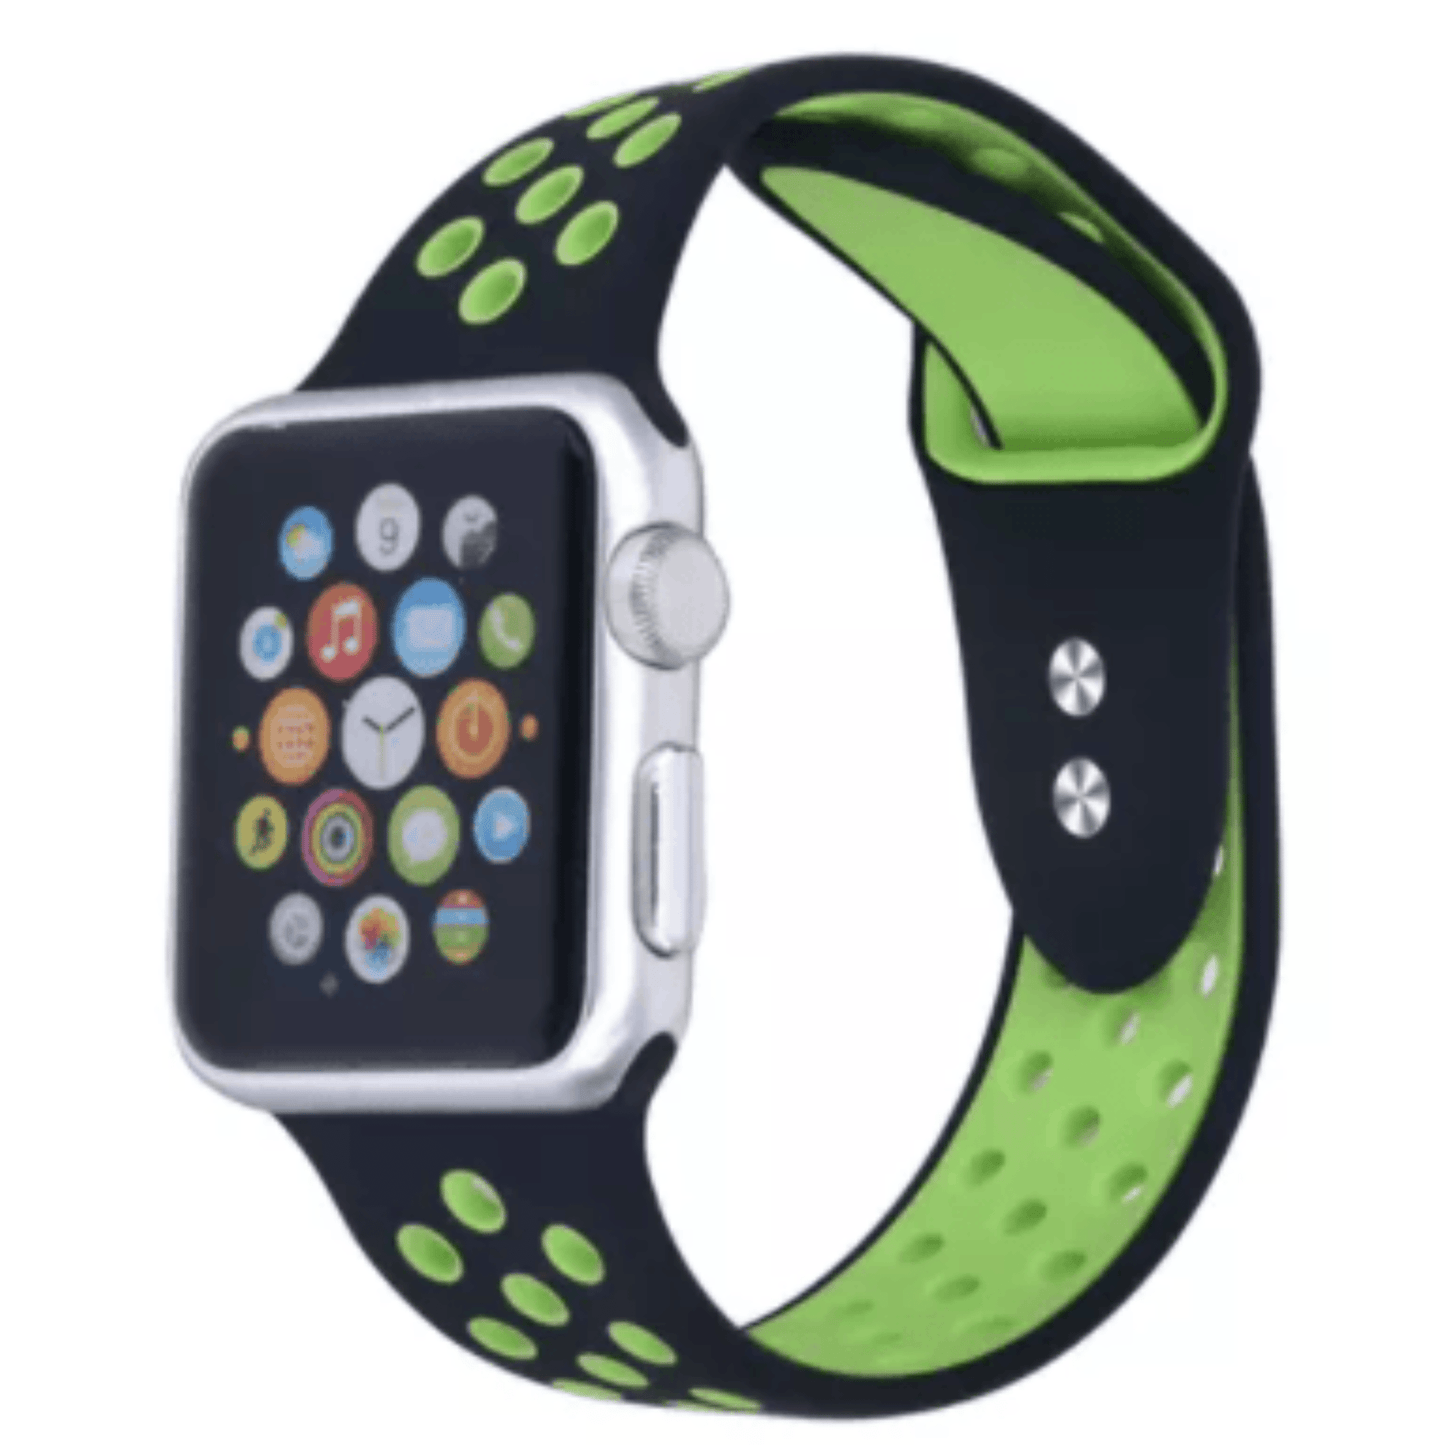 Breathable Silicone Sport Replacement Band for Apple Watch Black Neon Green Apple Watch Band Elements Watches